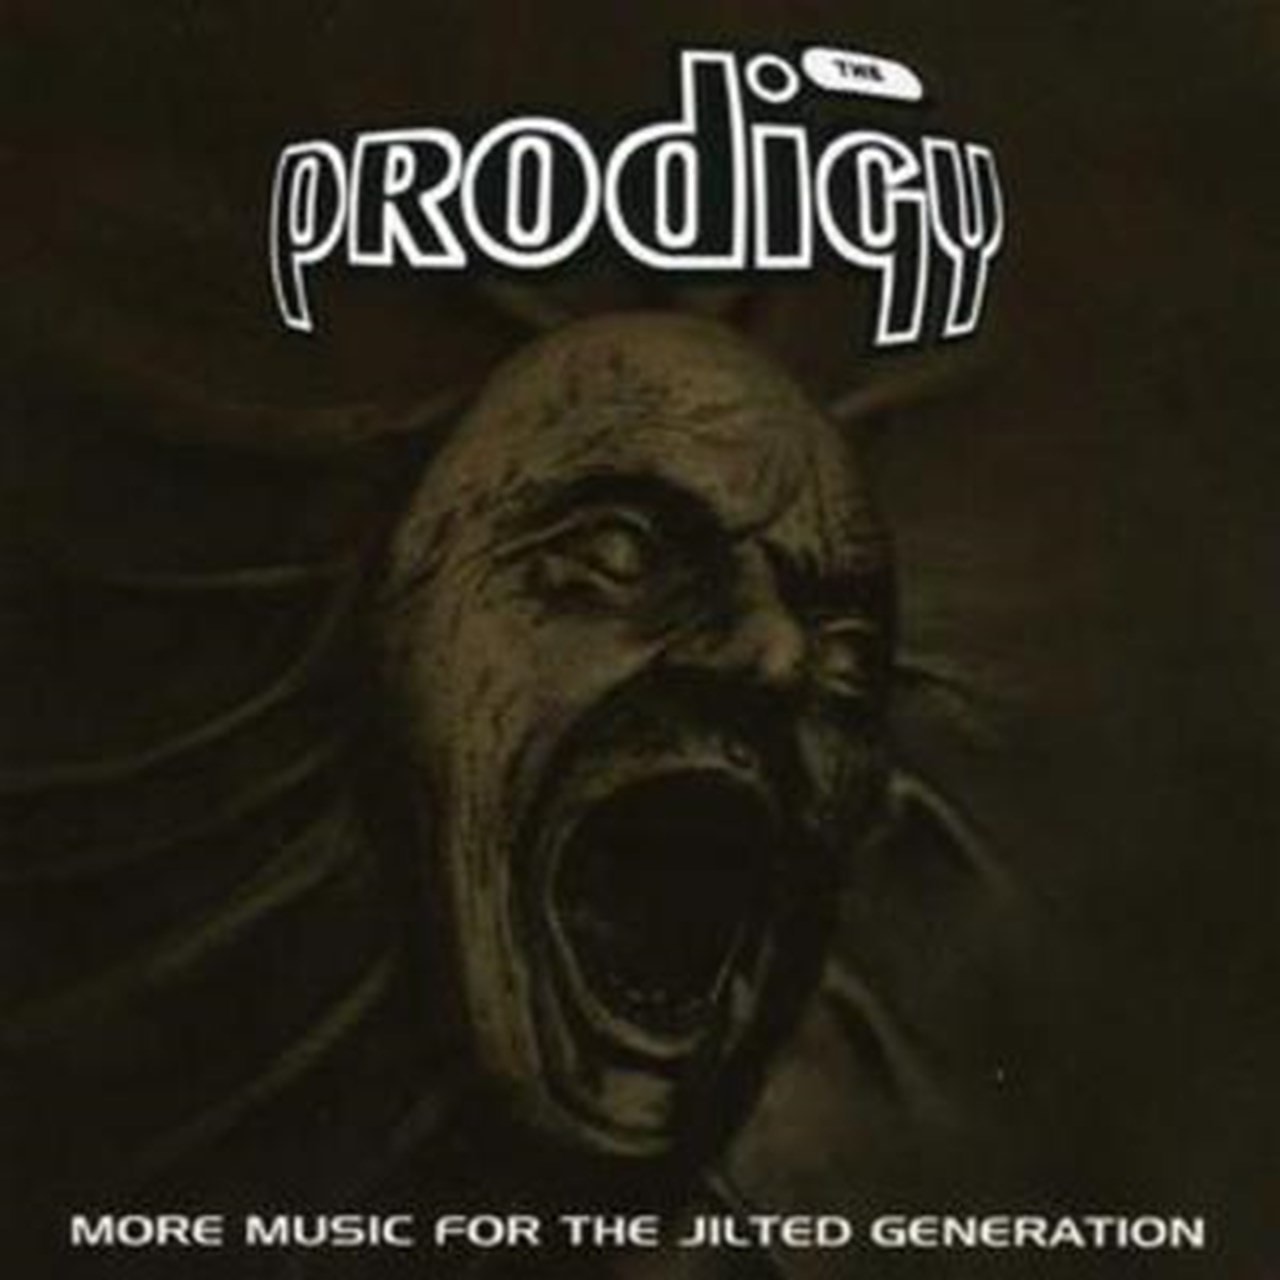 Music for the jilted generation. The Prodigy 2008 - more Music for the jilted Generation (Remastered). Music for the jilted Generation the Prodigy. Prodigy 1994 альбом. The Prodigy Music for the jilted.